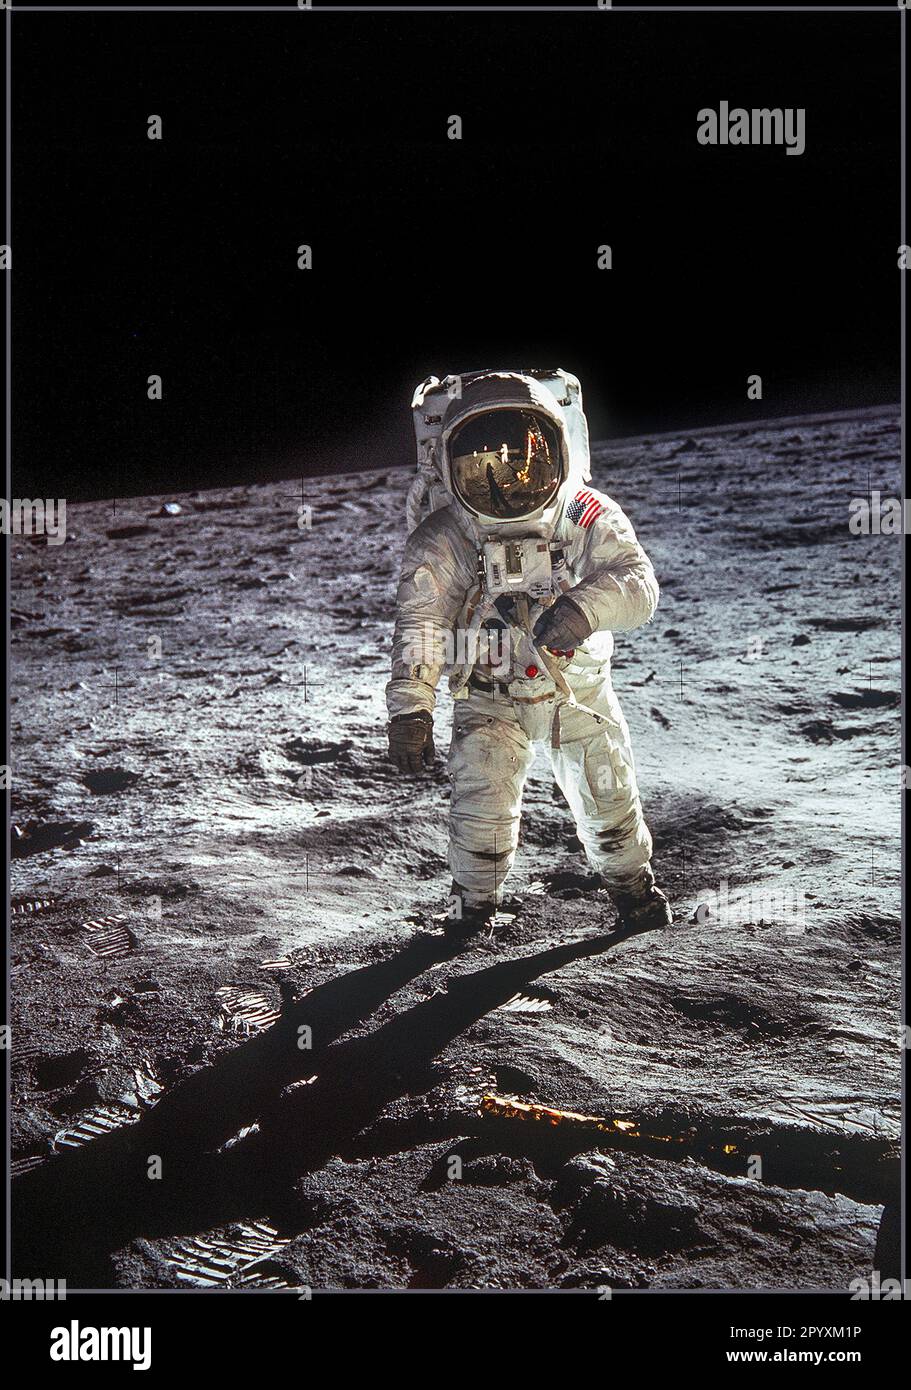 APOLLO 11. 20th July 1969 Astronaut Buzz Aldrin, lunar module pilot, walks on the surface of the Moon near the leg of the Lunar Module (LM) 'Eagle' during the Apollo 11 extravehicular activity (EVA). Astronaut Neil A. Armstrong, commander, took this photograph with a 70mm lunar surface camera. While astronauts Armstrong and Aldrin descended in the Lunar Module (LM) 'Eagle' to explore the Sea of Tranquility region of the Moon, astronaut Michael Collins, command module pilot, remained with the Command and Service Modules (CSM) 'Columbia' in lunar orbit. Stock Photo